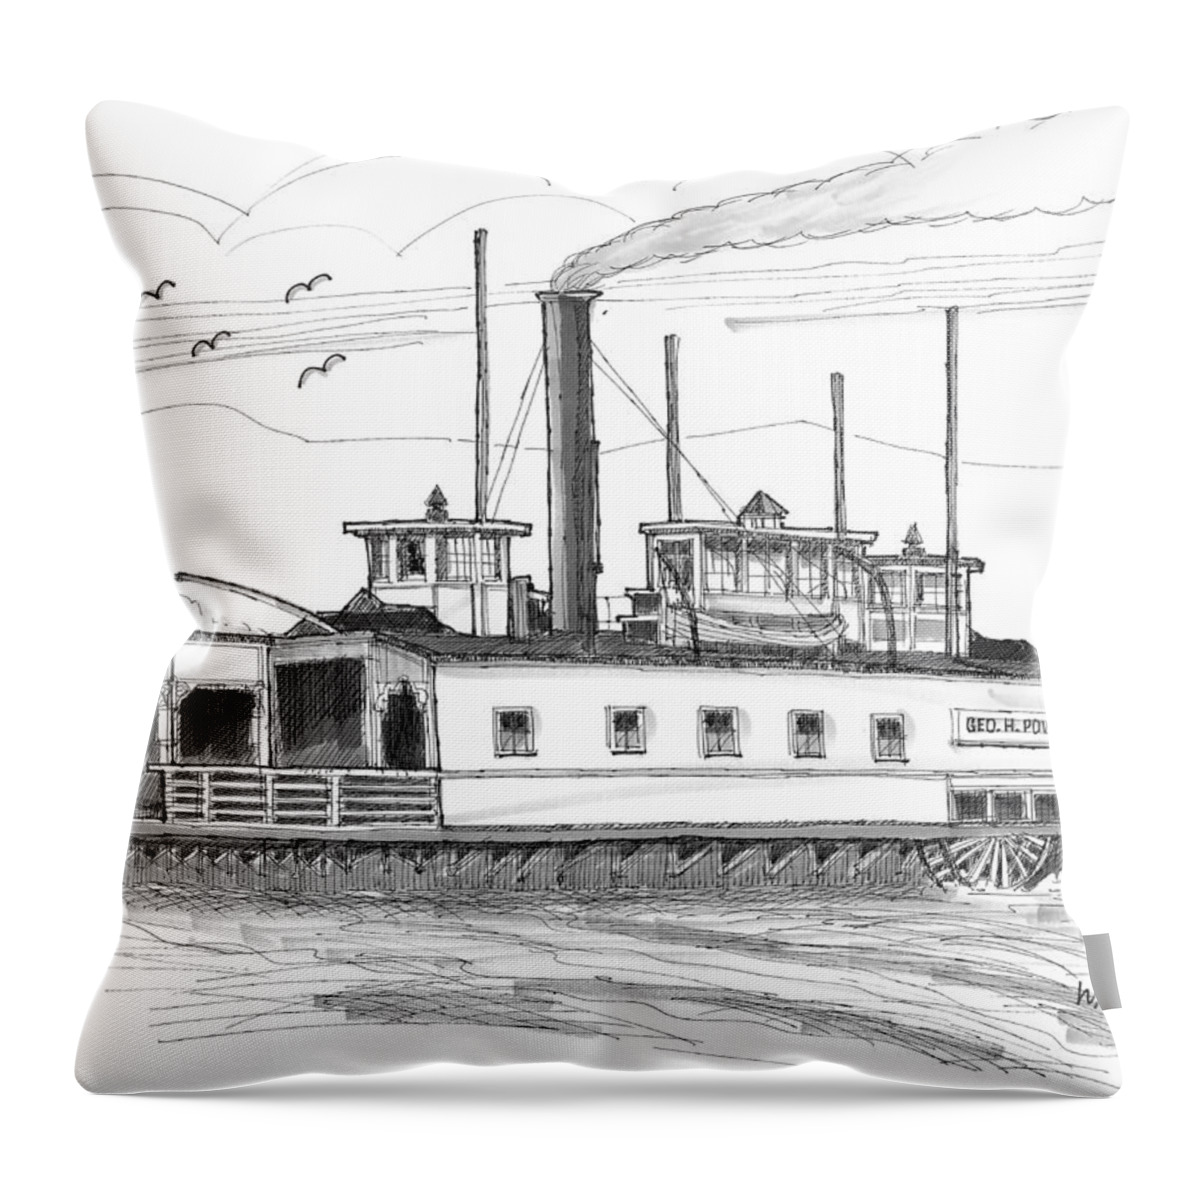 Geo H Powers Throw Pillow featuring the drawing Hudson River Steam Ferry Boat Geo H Powers by Richard Wambach